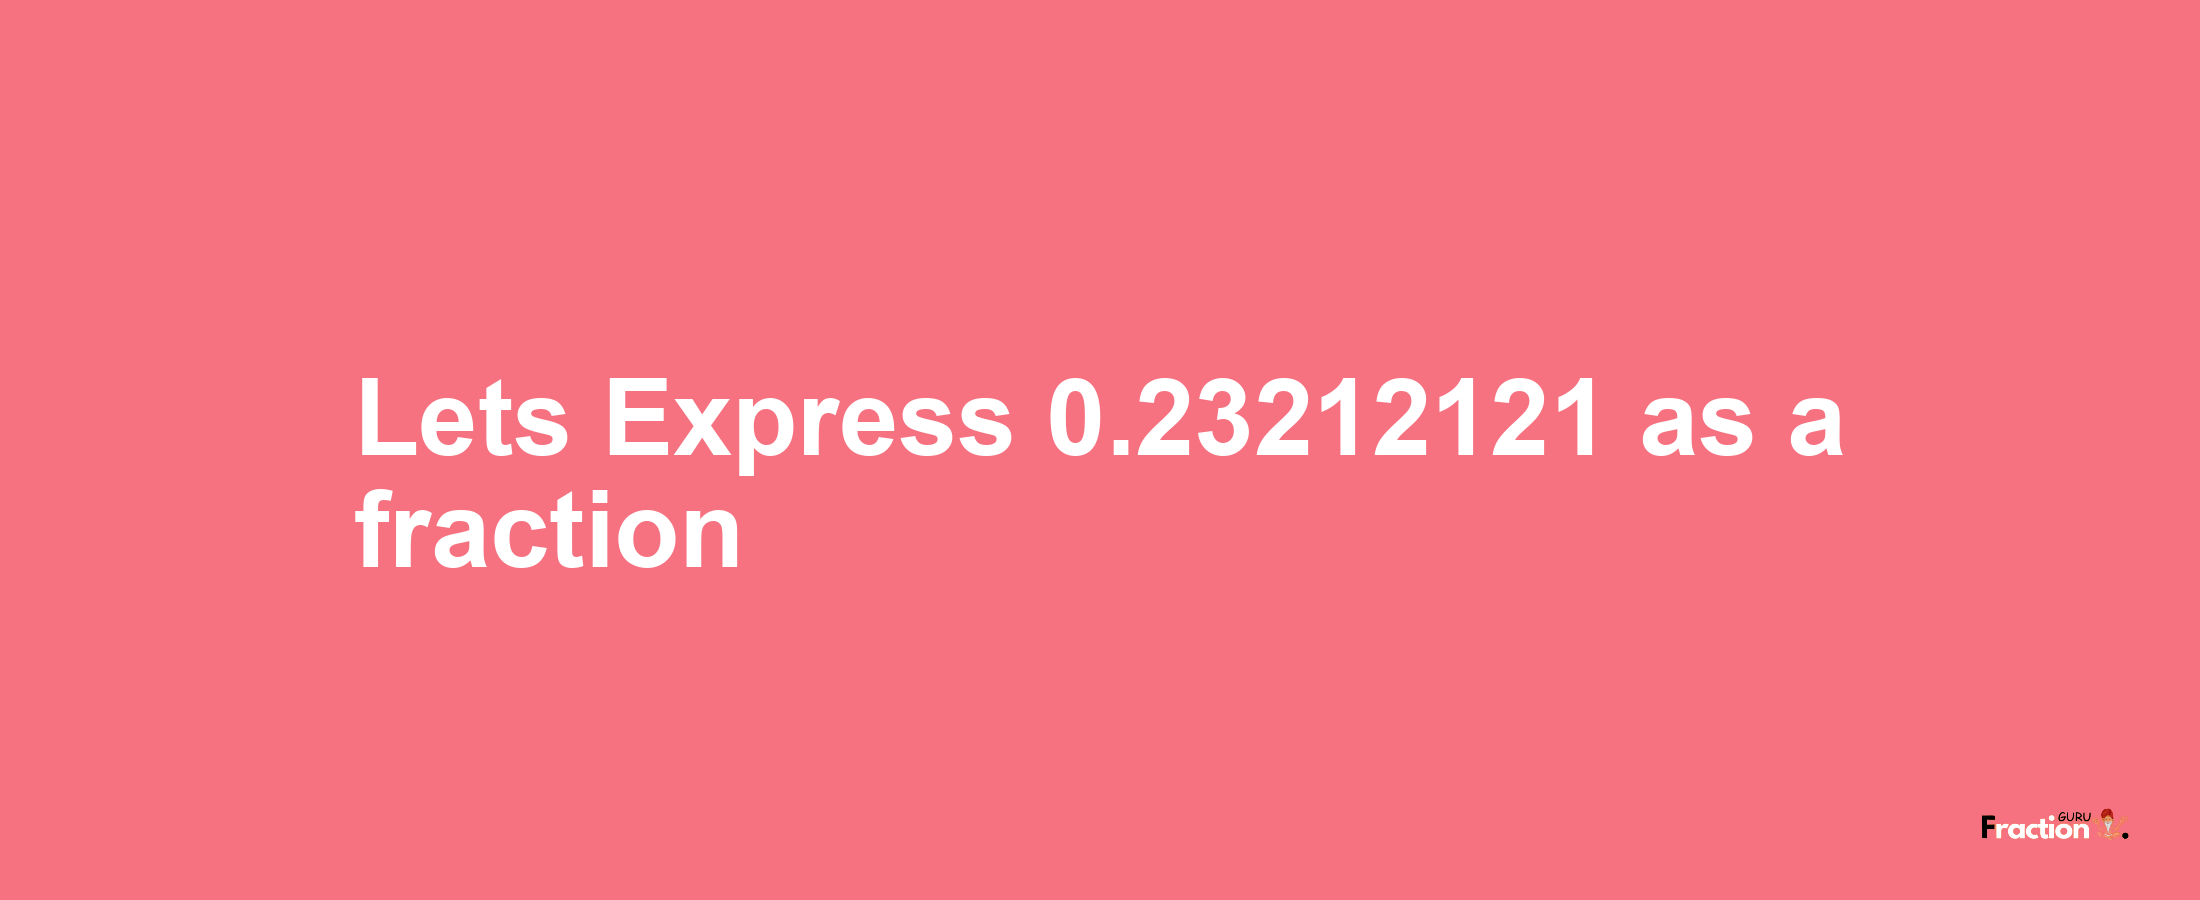 Lets Express 0.23212121 as afraction